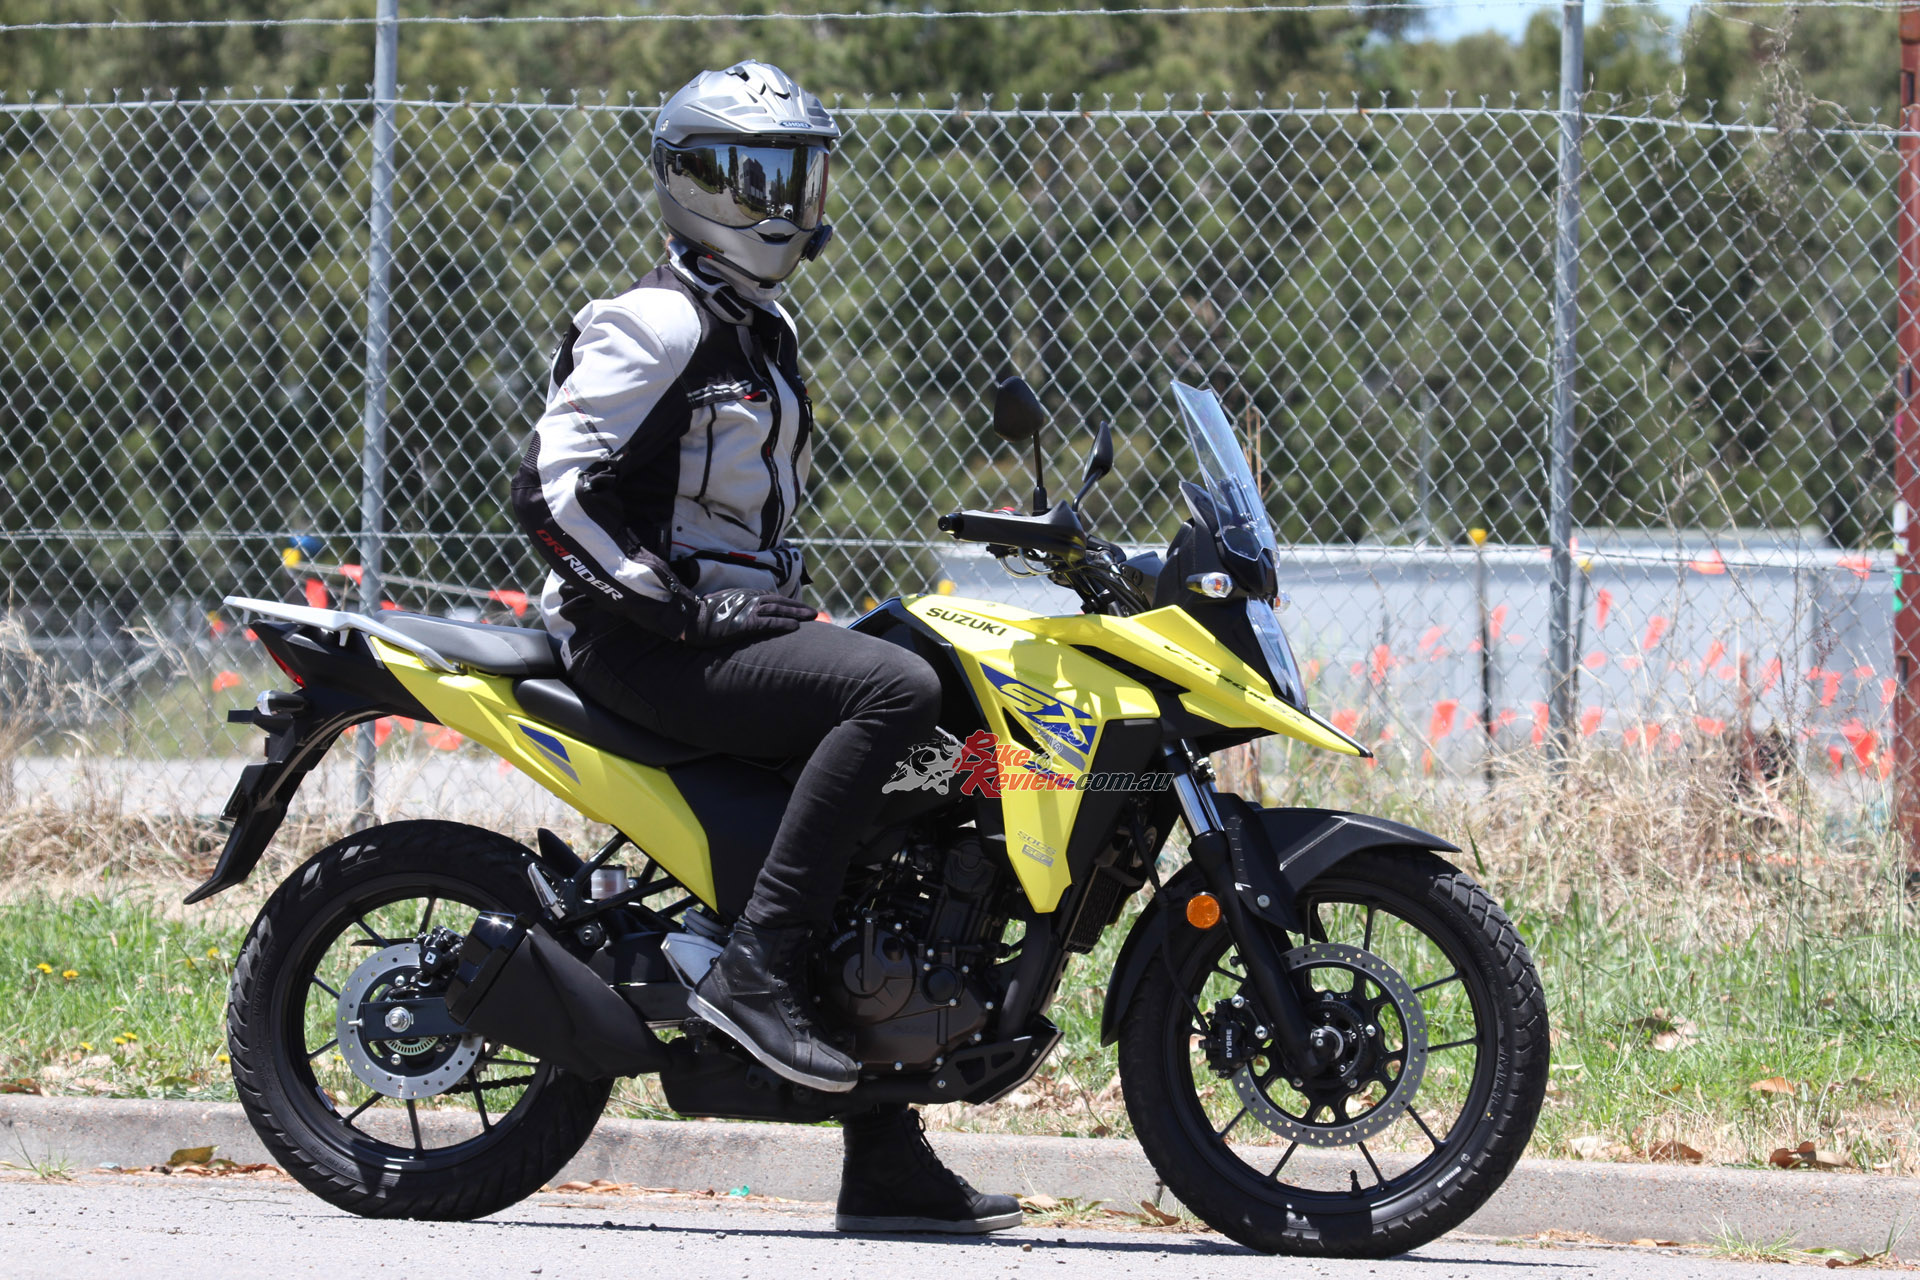 The new V-STROM 250SX is revised from the ground up, with a new oil-cooled motor, new chassis, bodywork, electronics and price that is almost a grand less than the 2019 model we reviewed.